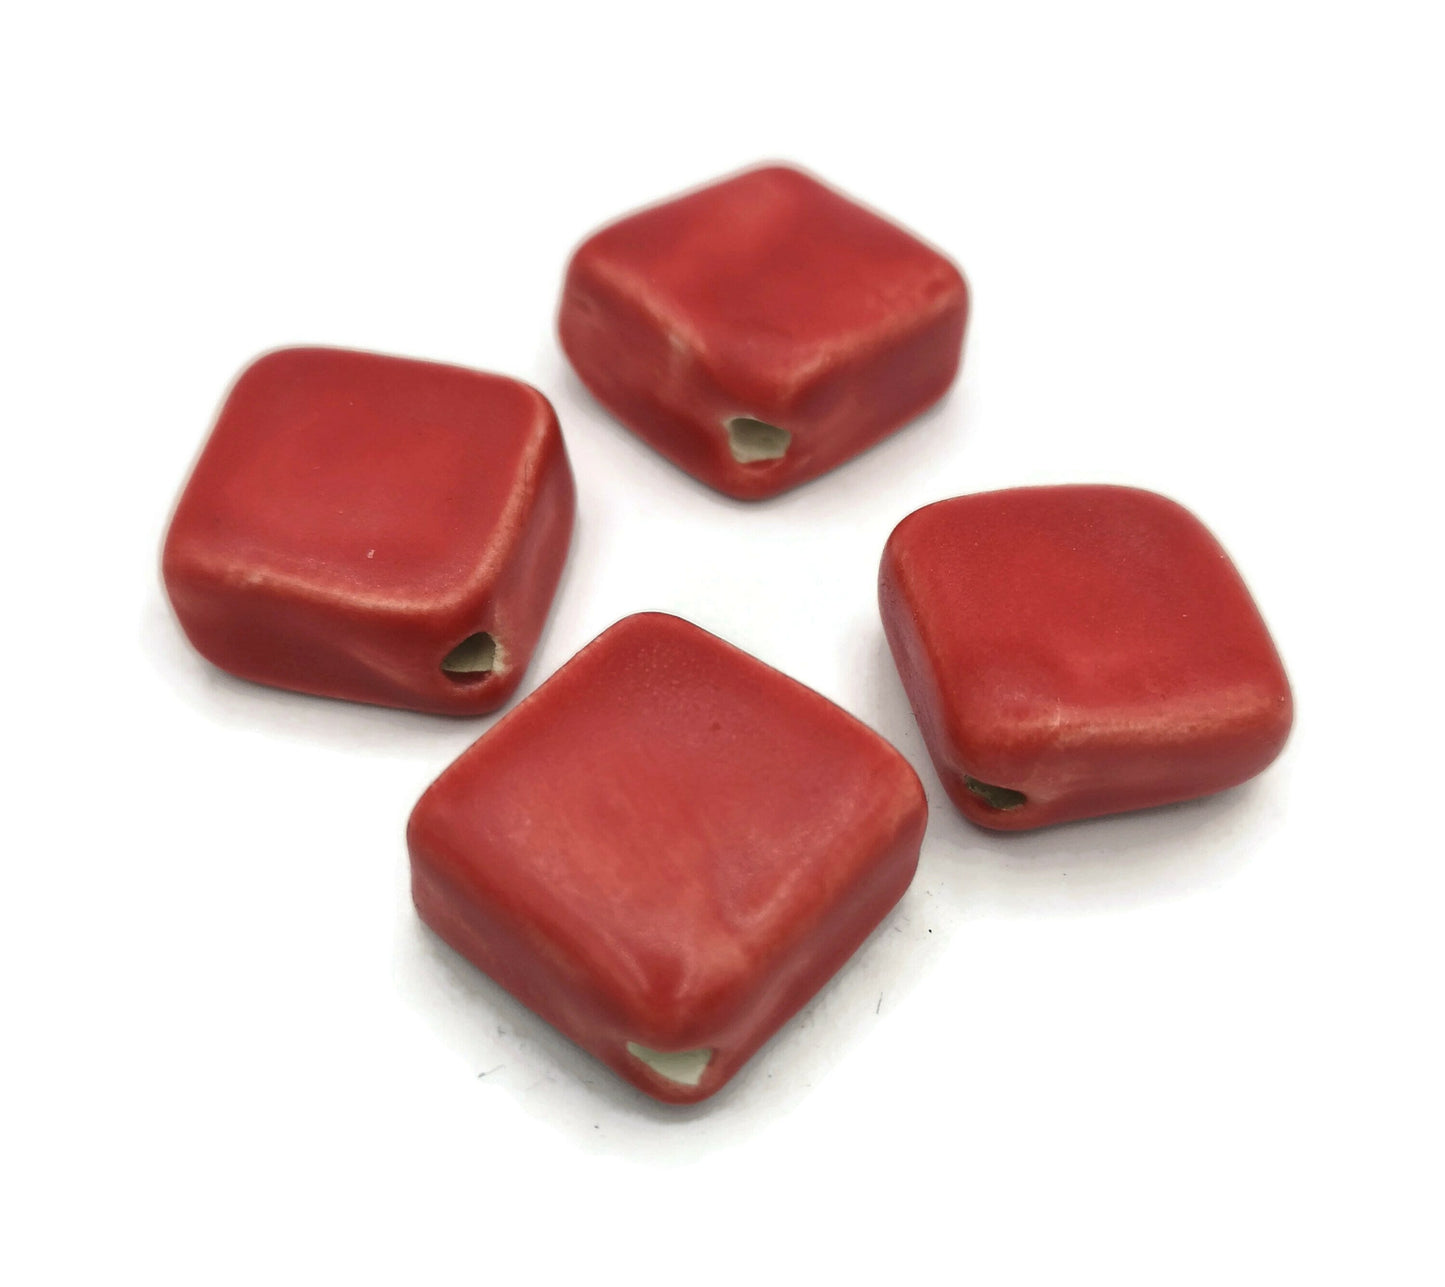 4Pc 20mm Large Square Handmade Ceramic Beads For Jewelry Making, Clay Decorative Unique Beads, Matte Red Macrame Beads Large Hole 2mm - Ceramica Ana Rafael